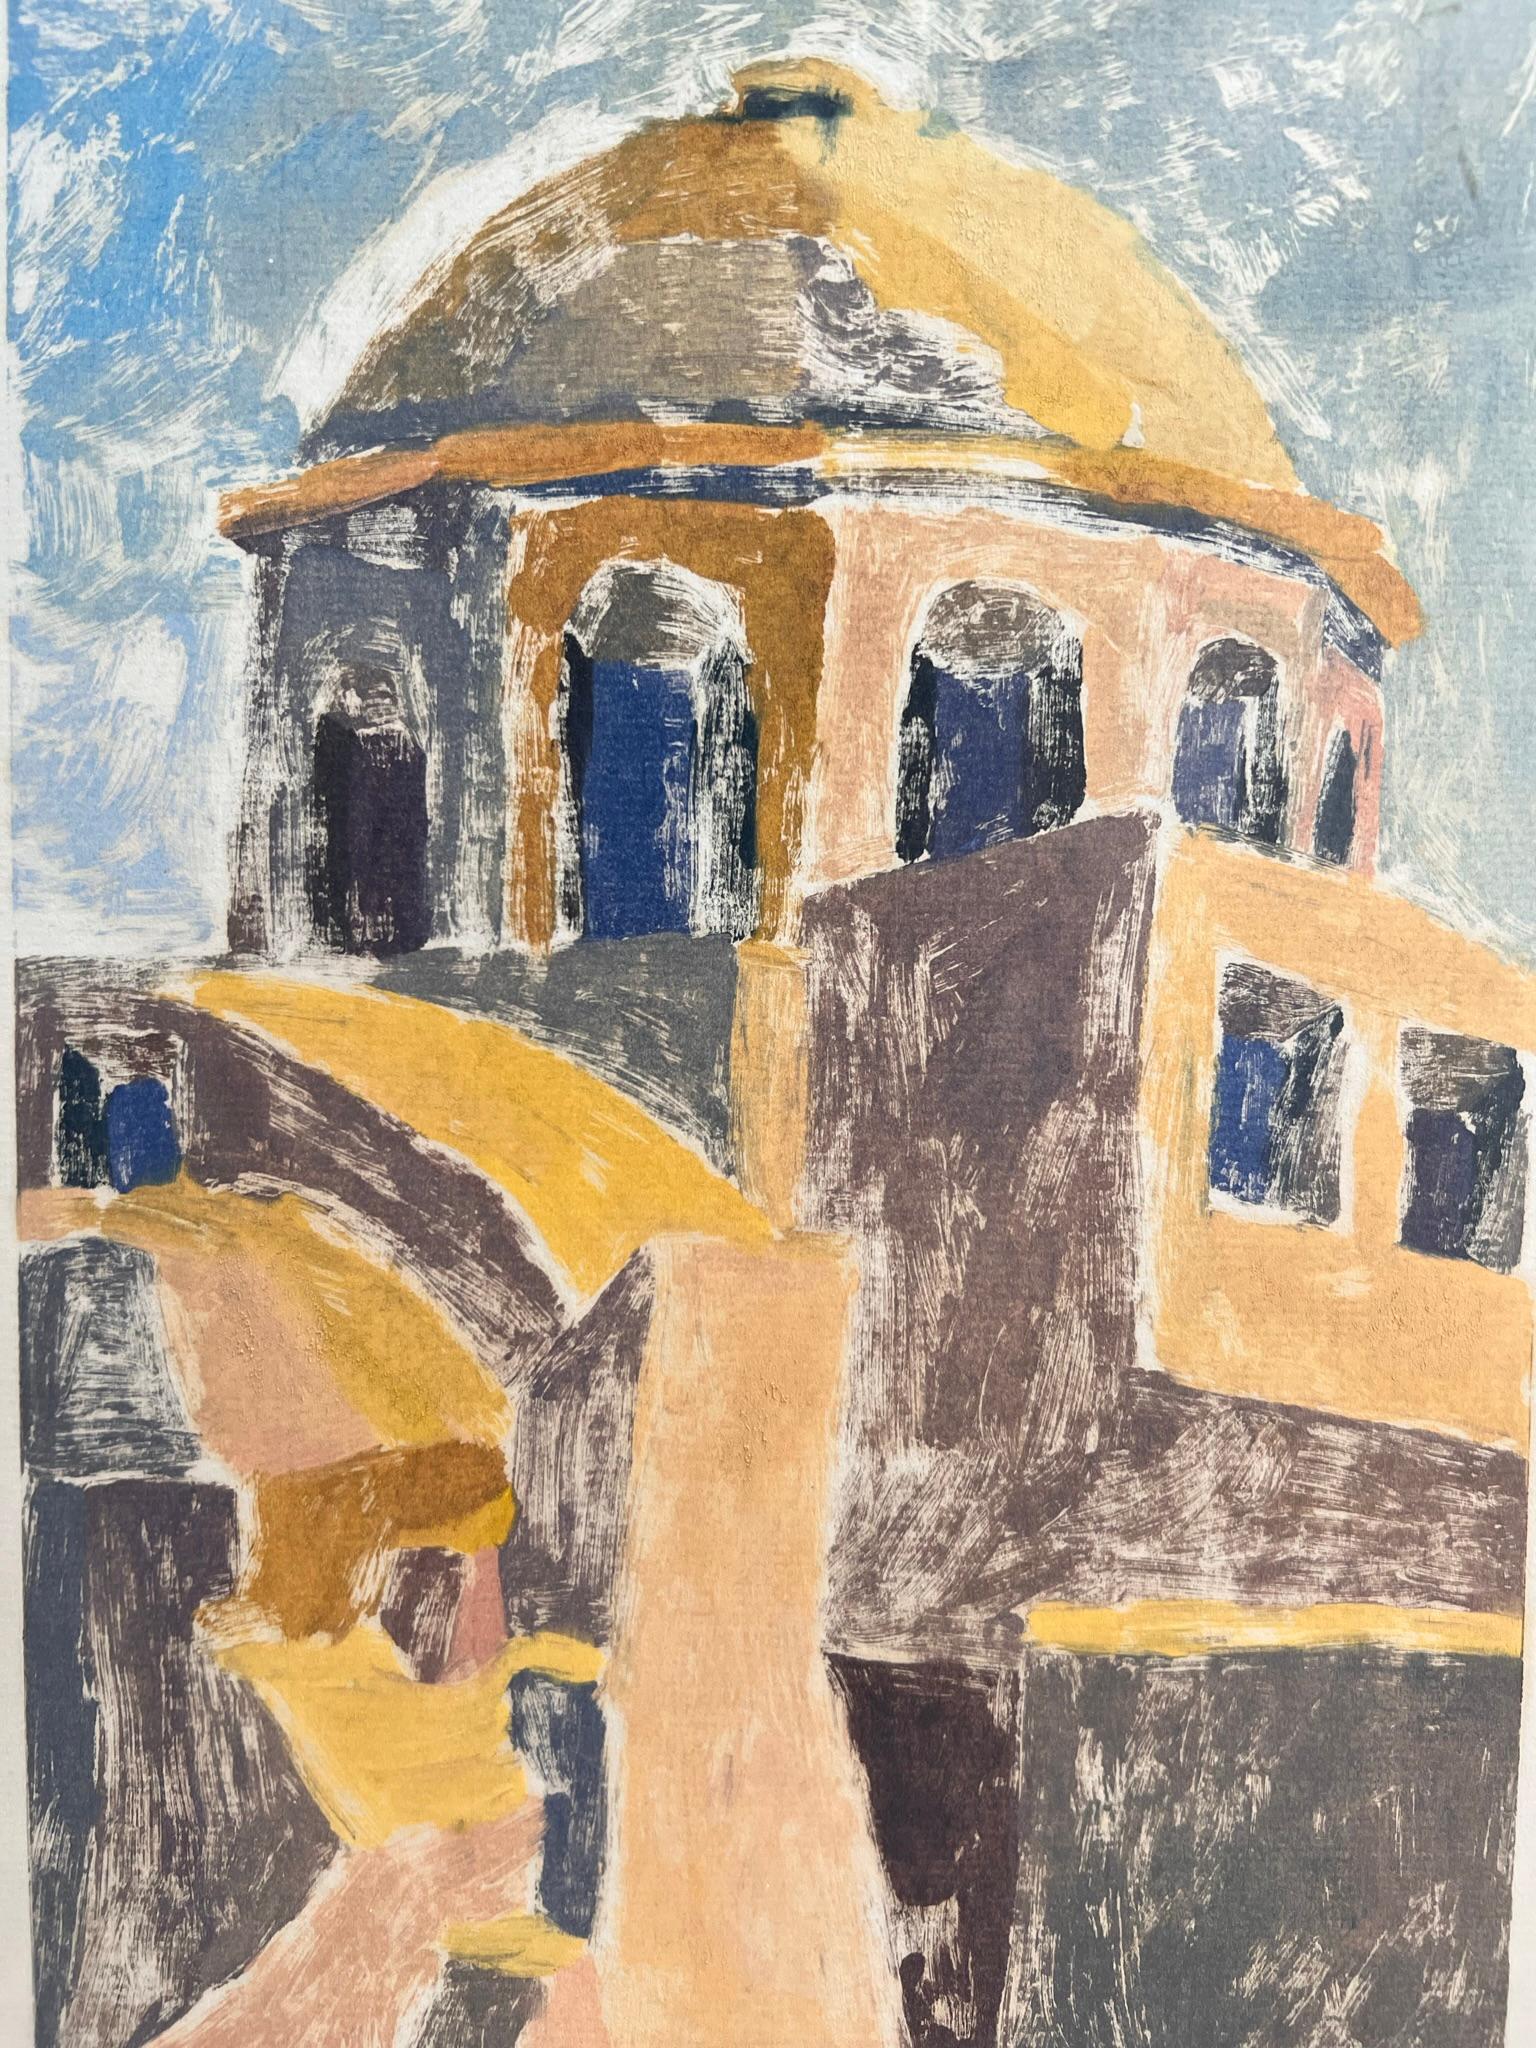 Pair of Original Monotype Etchings of the Duomo, Signed by Artist, 1981 For Sale 2